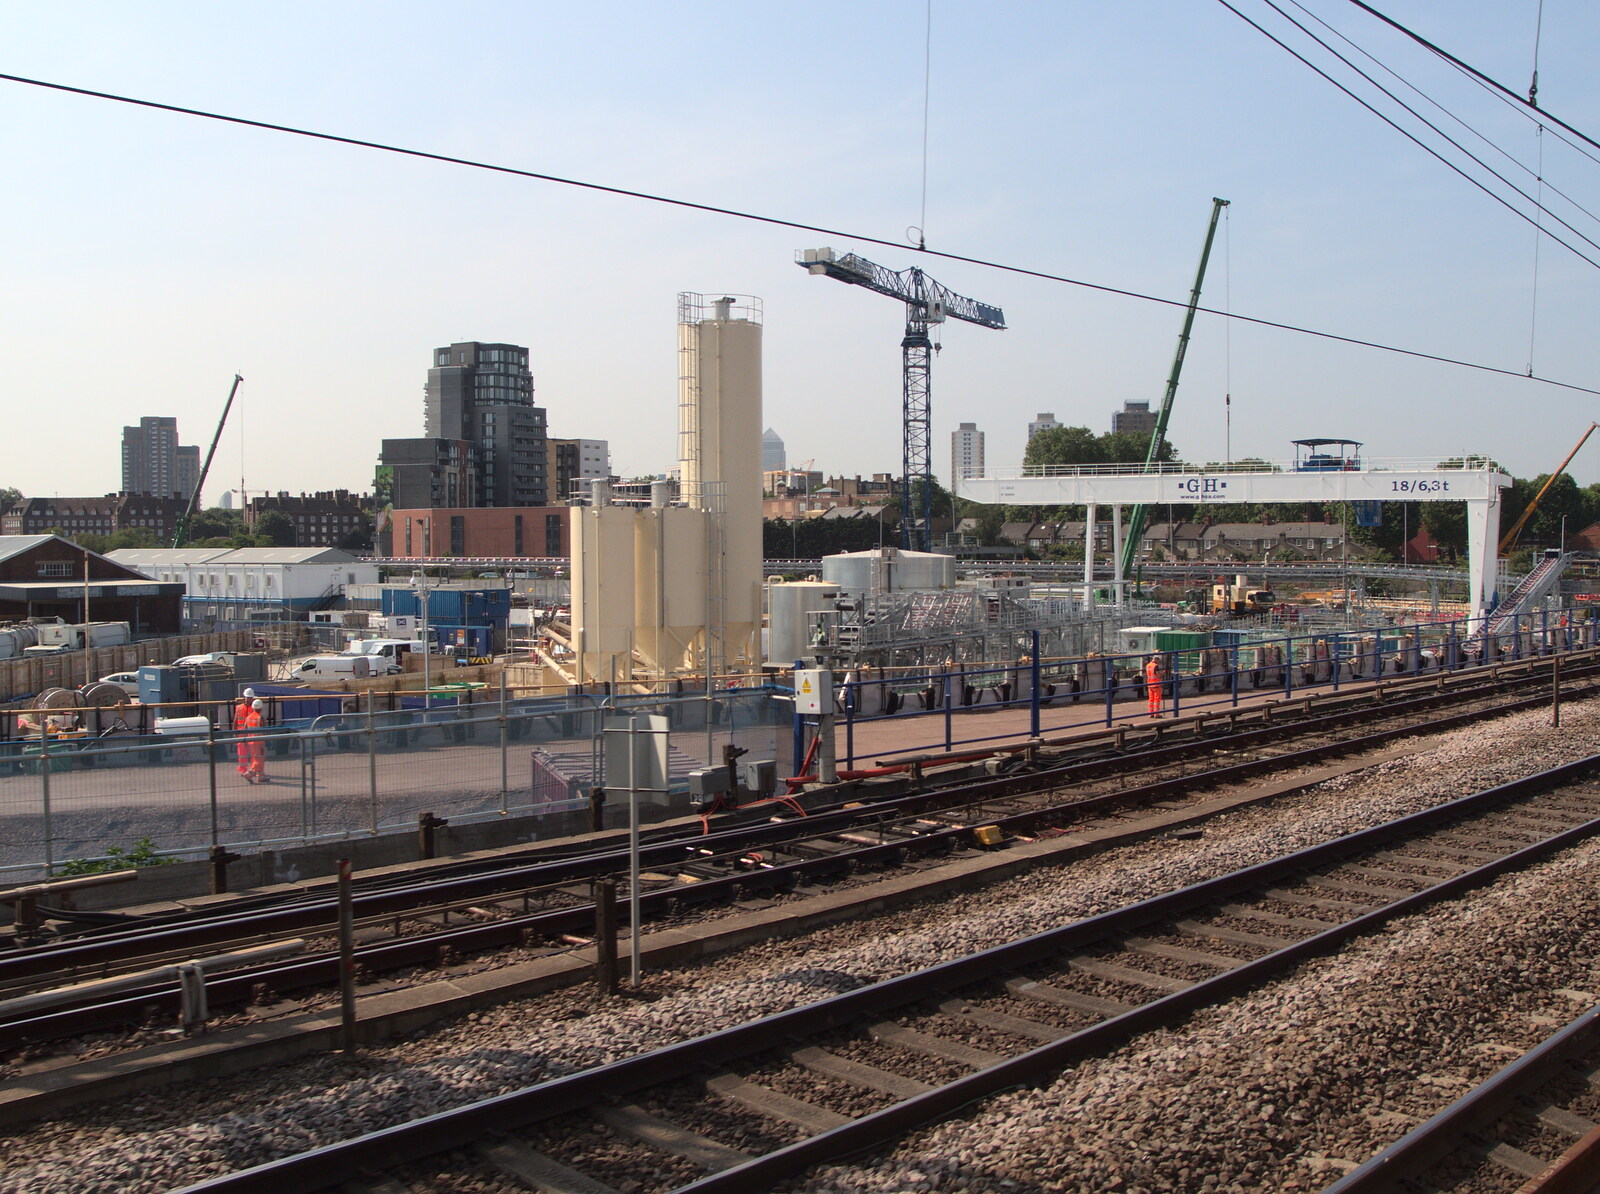 The Crossrail Stratford site from The Demolition of the Garage, Brome, Suffolk - 17th July 2013